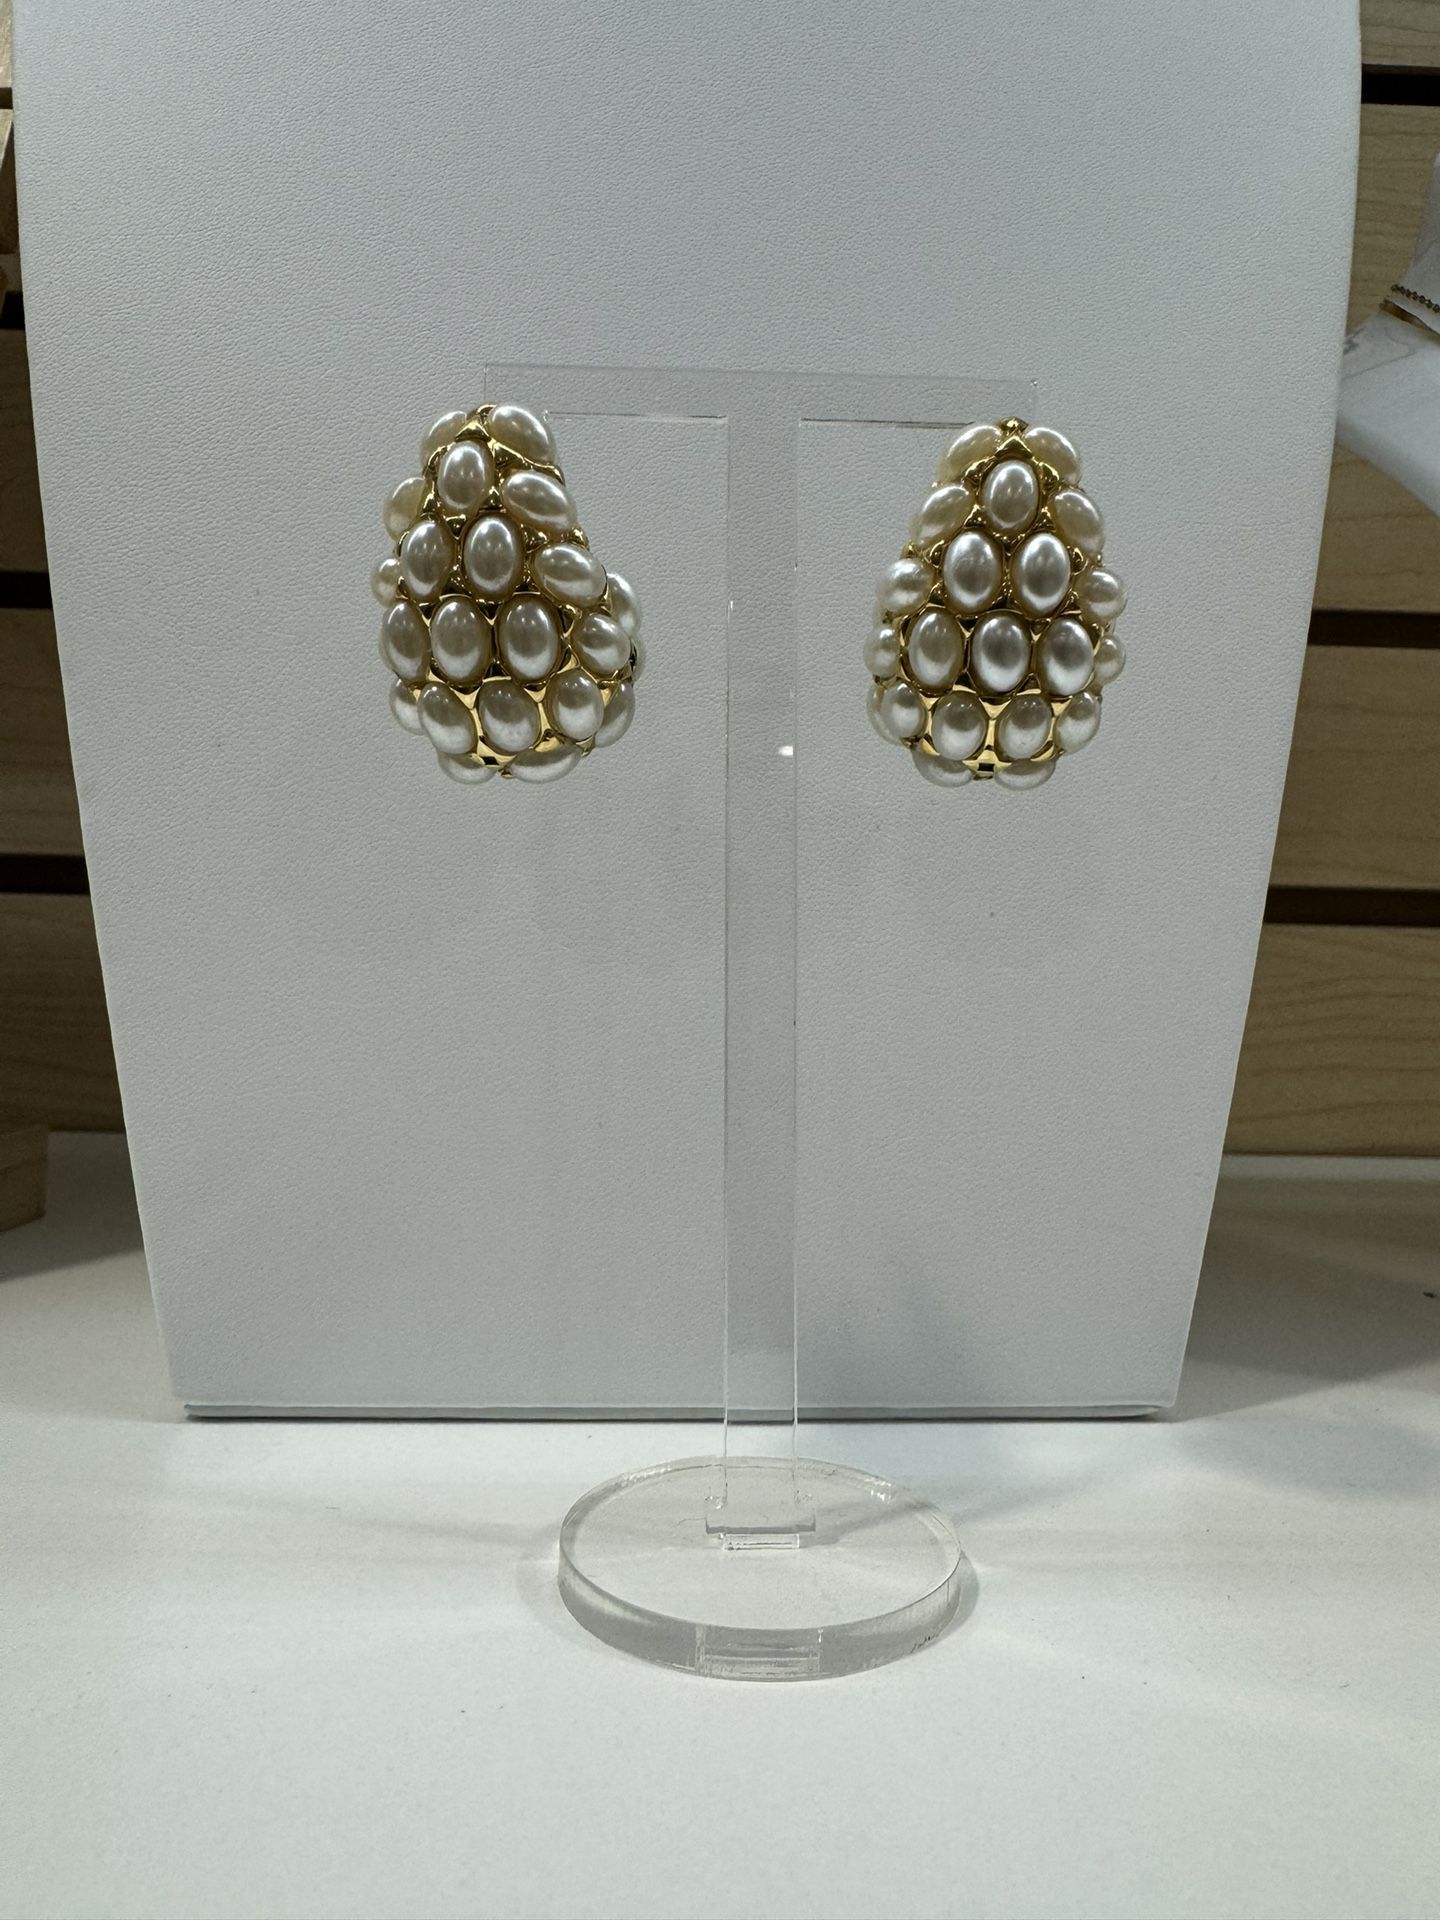 Stainless Steel Good Quality Earrings 